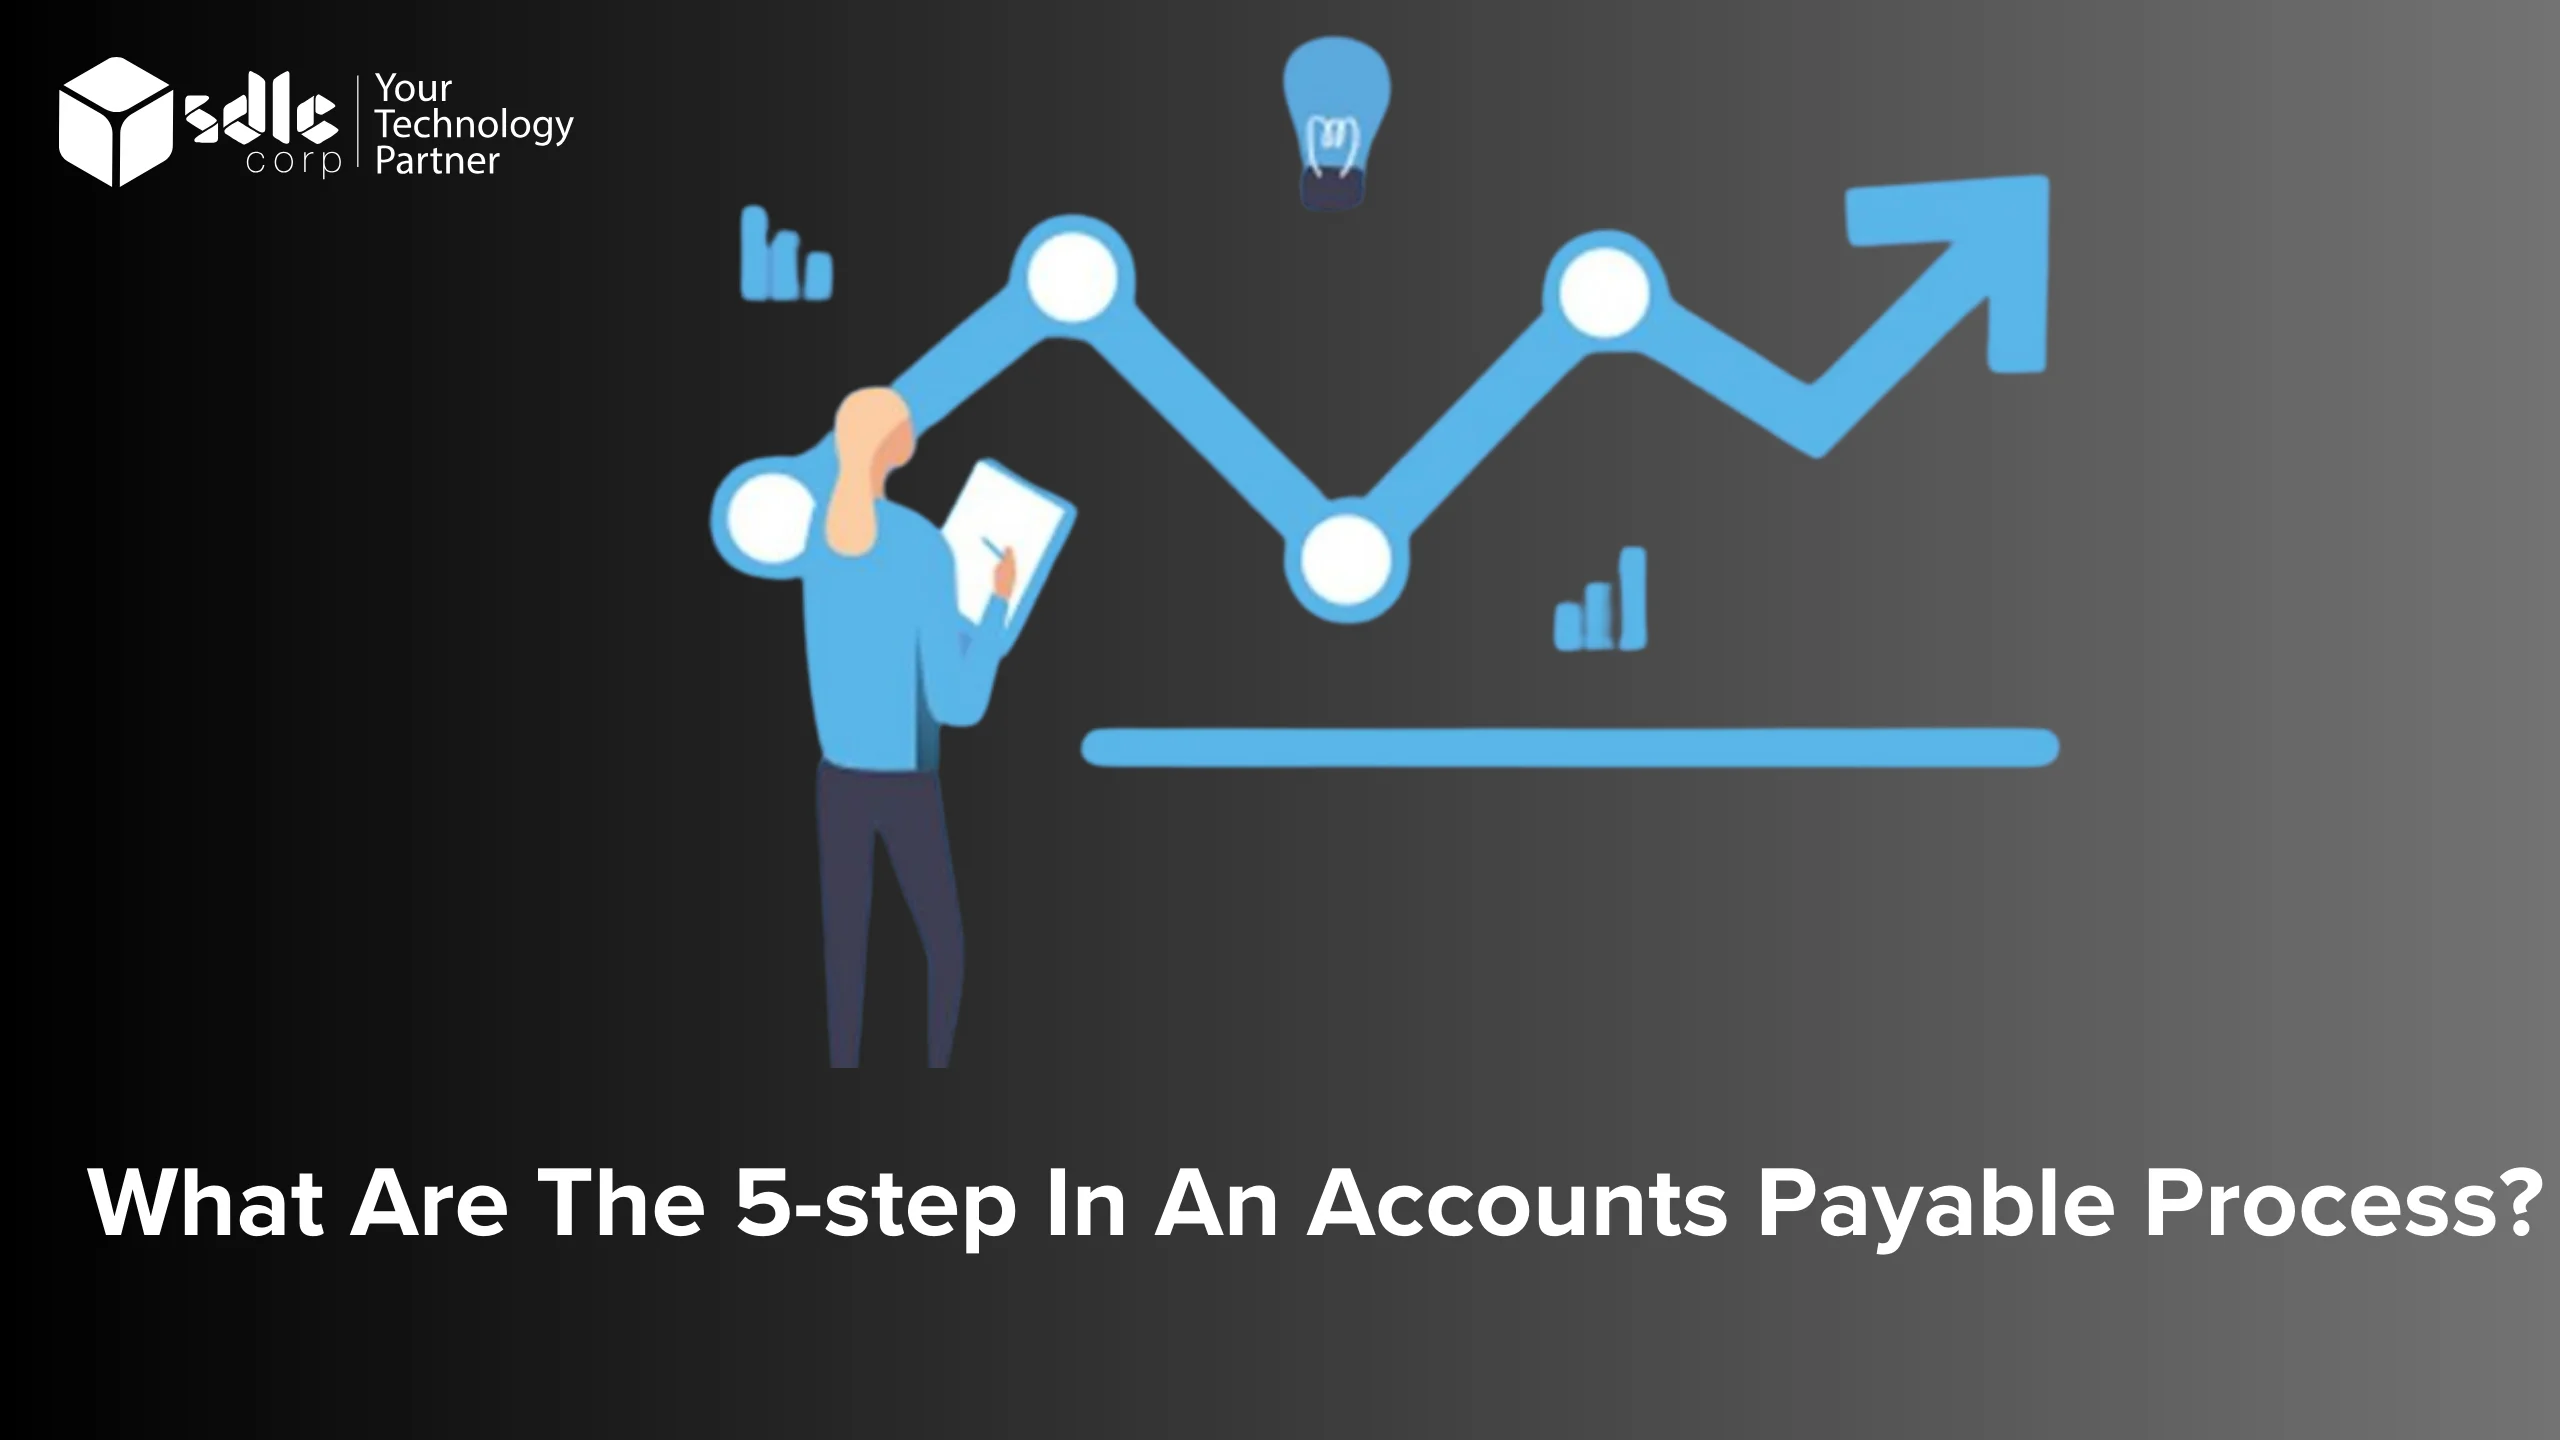 What Are the 5-Step in an Accounts Payable Process?